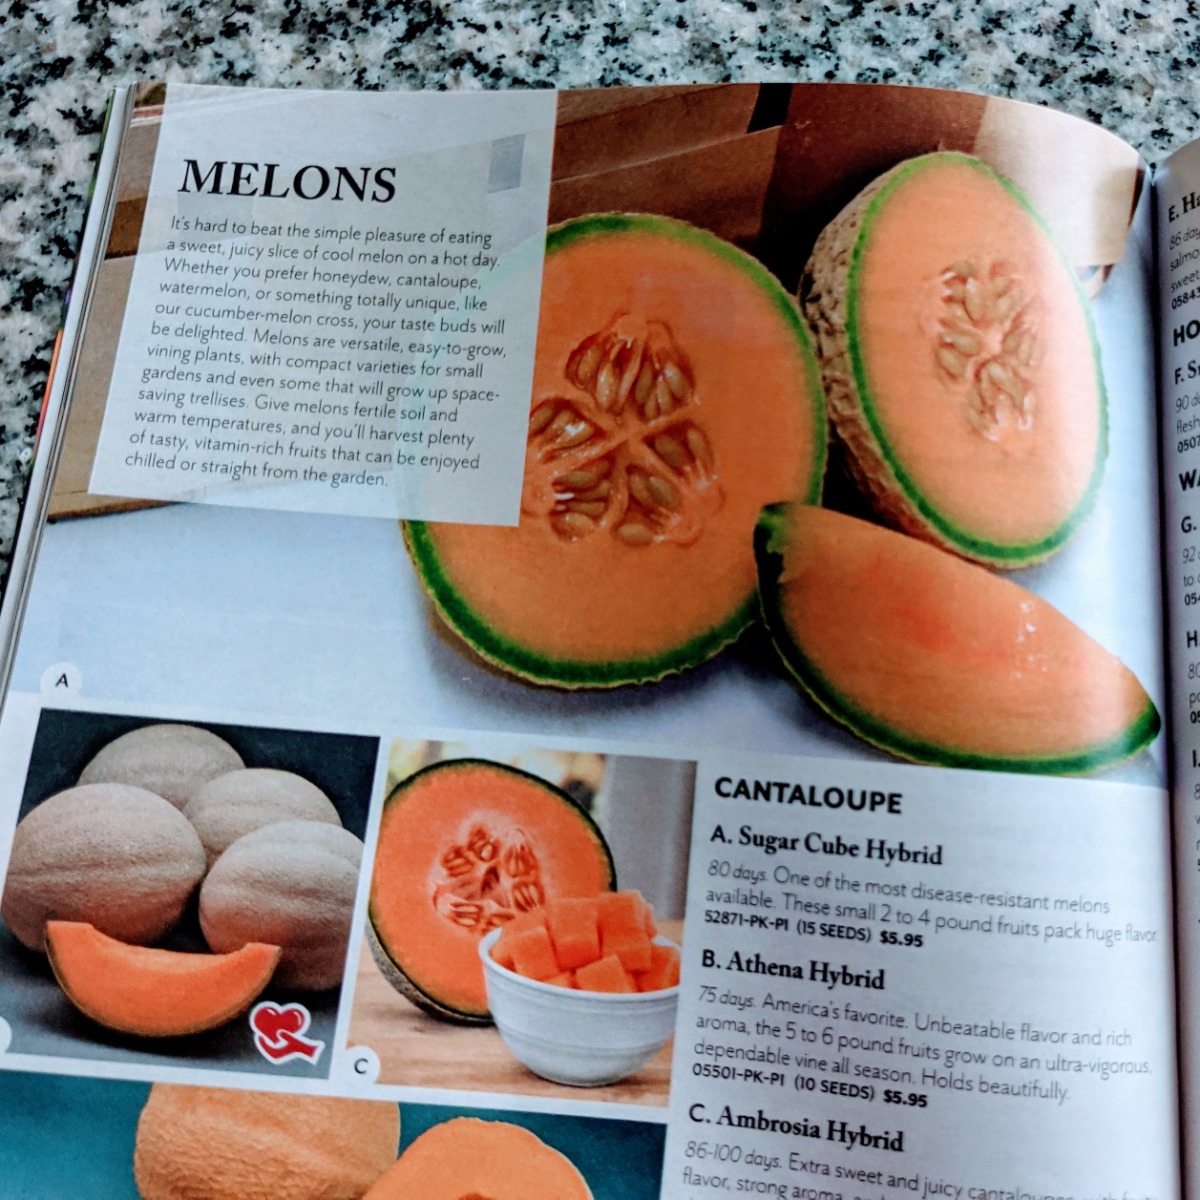 Catalogue page for cantaloupe seeds for planting